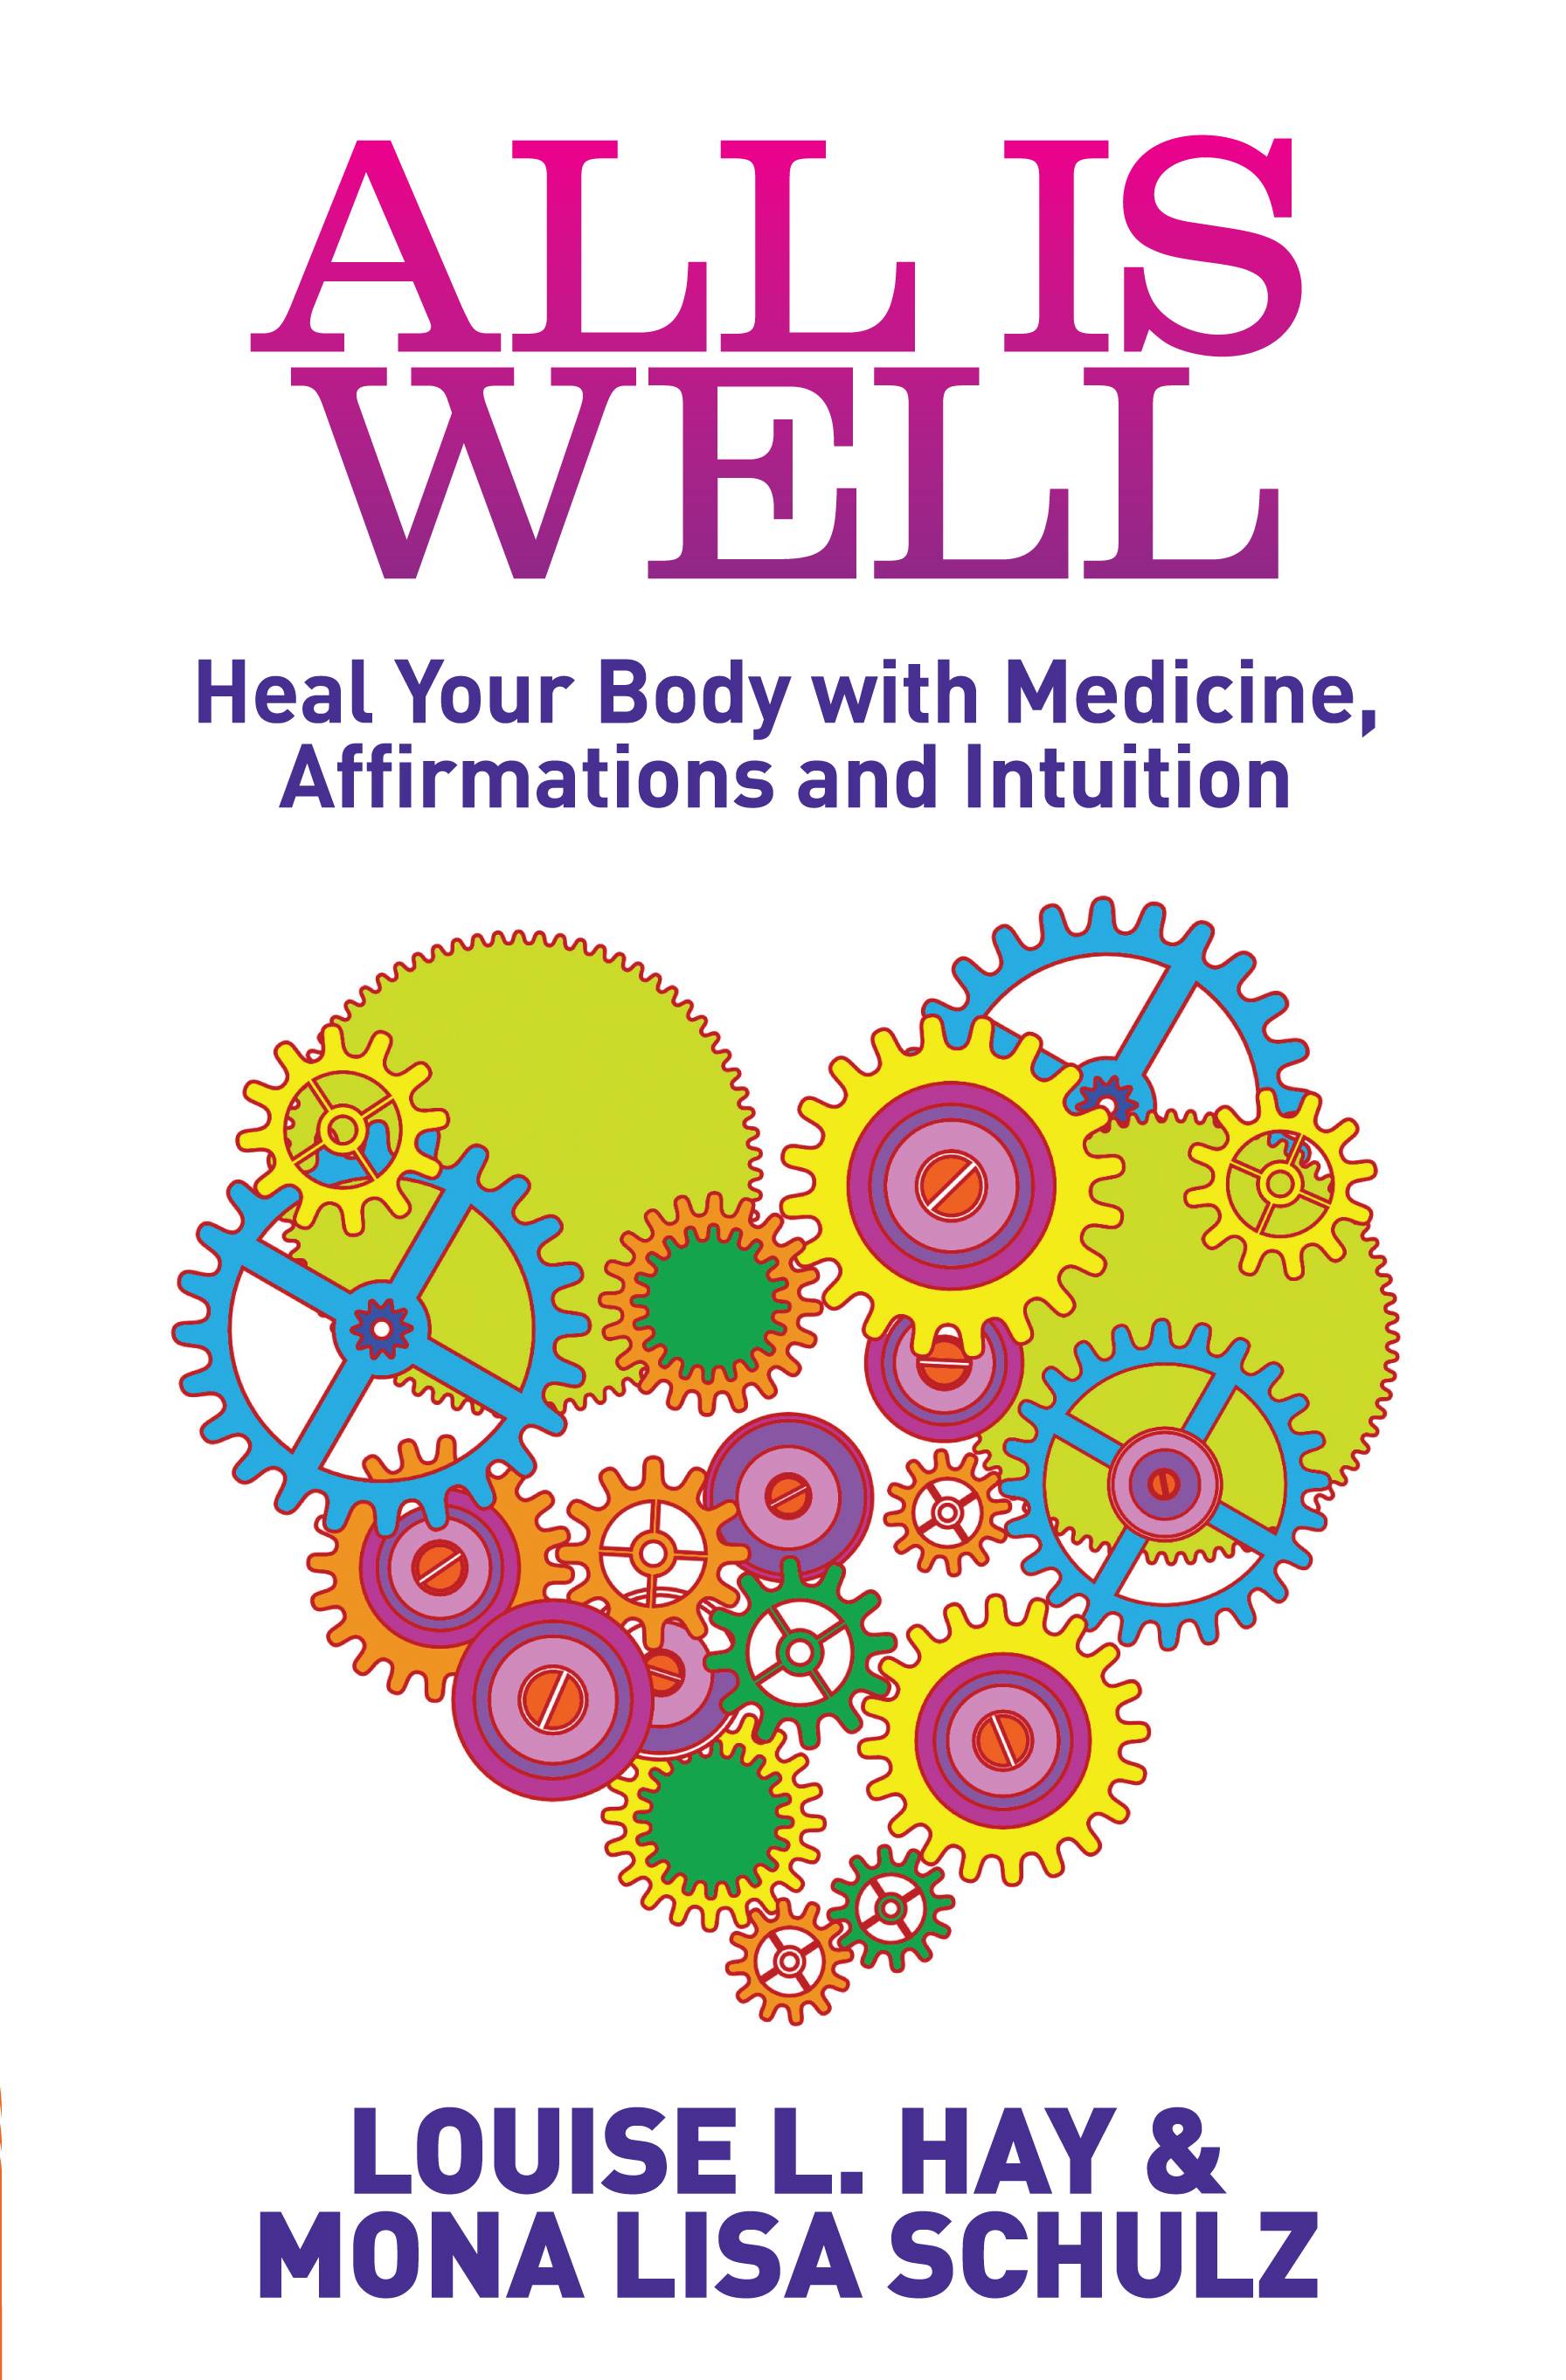 All is well - heal your body with medicine, affirmations and intuition